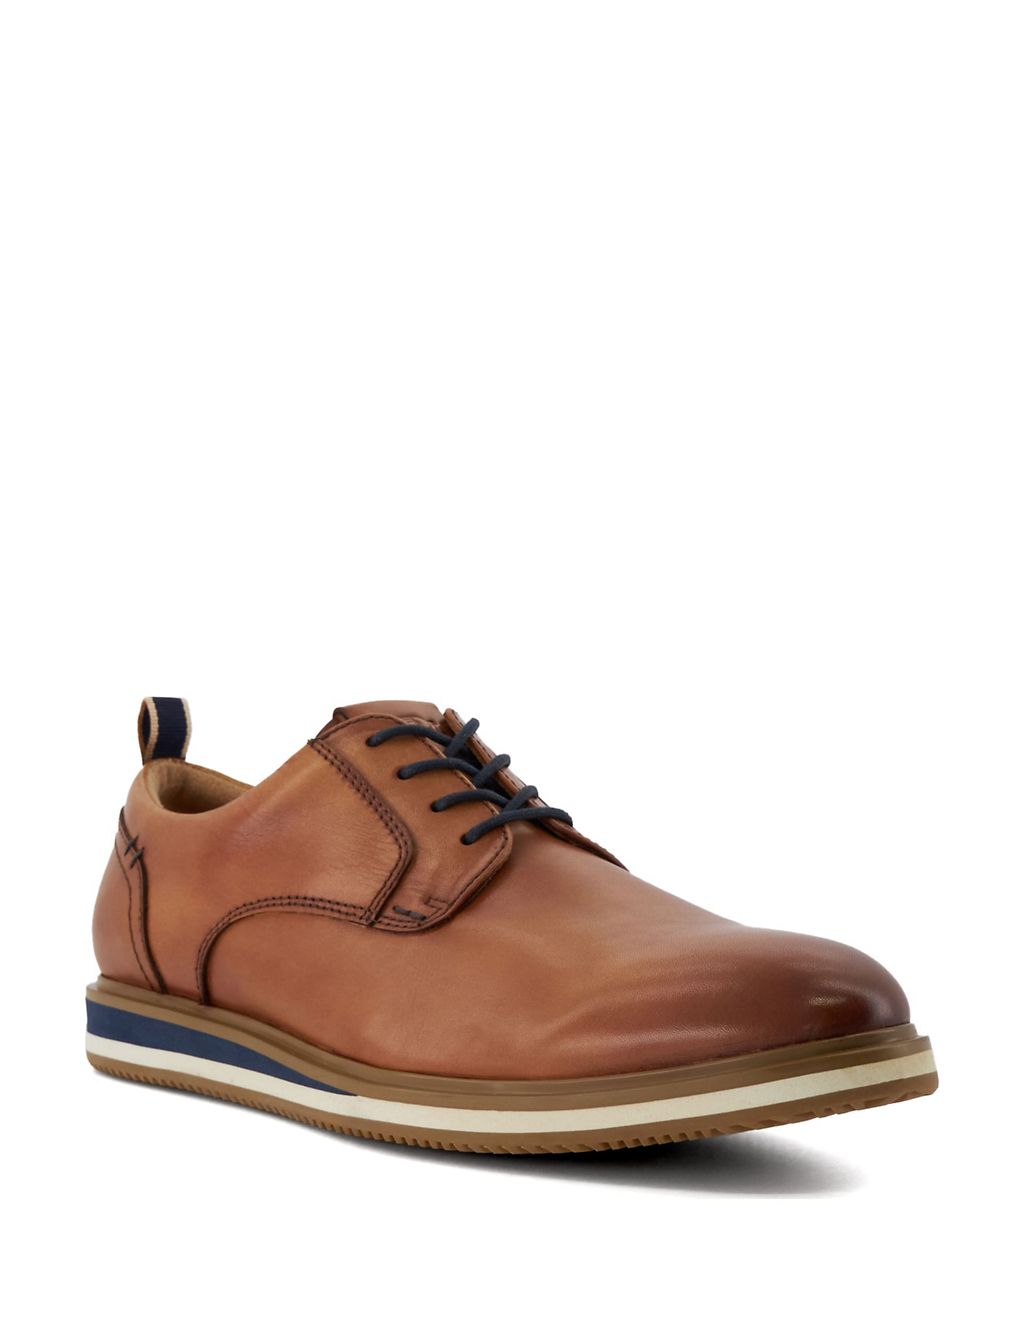 Wide Fit Leather Brogues | Dune London | M&S